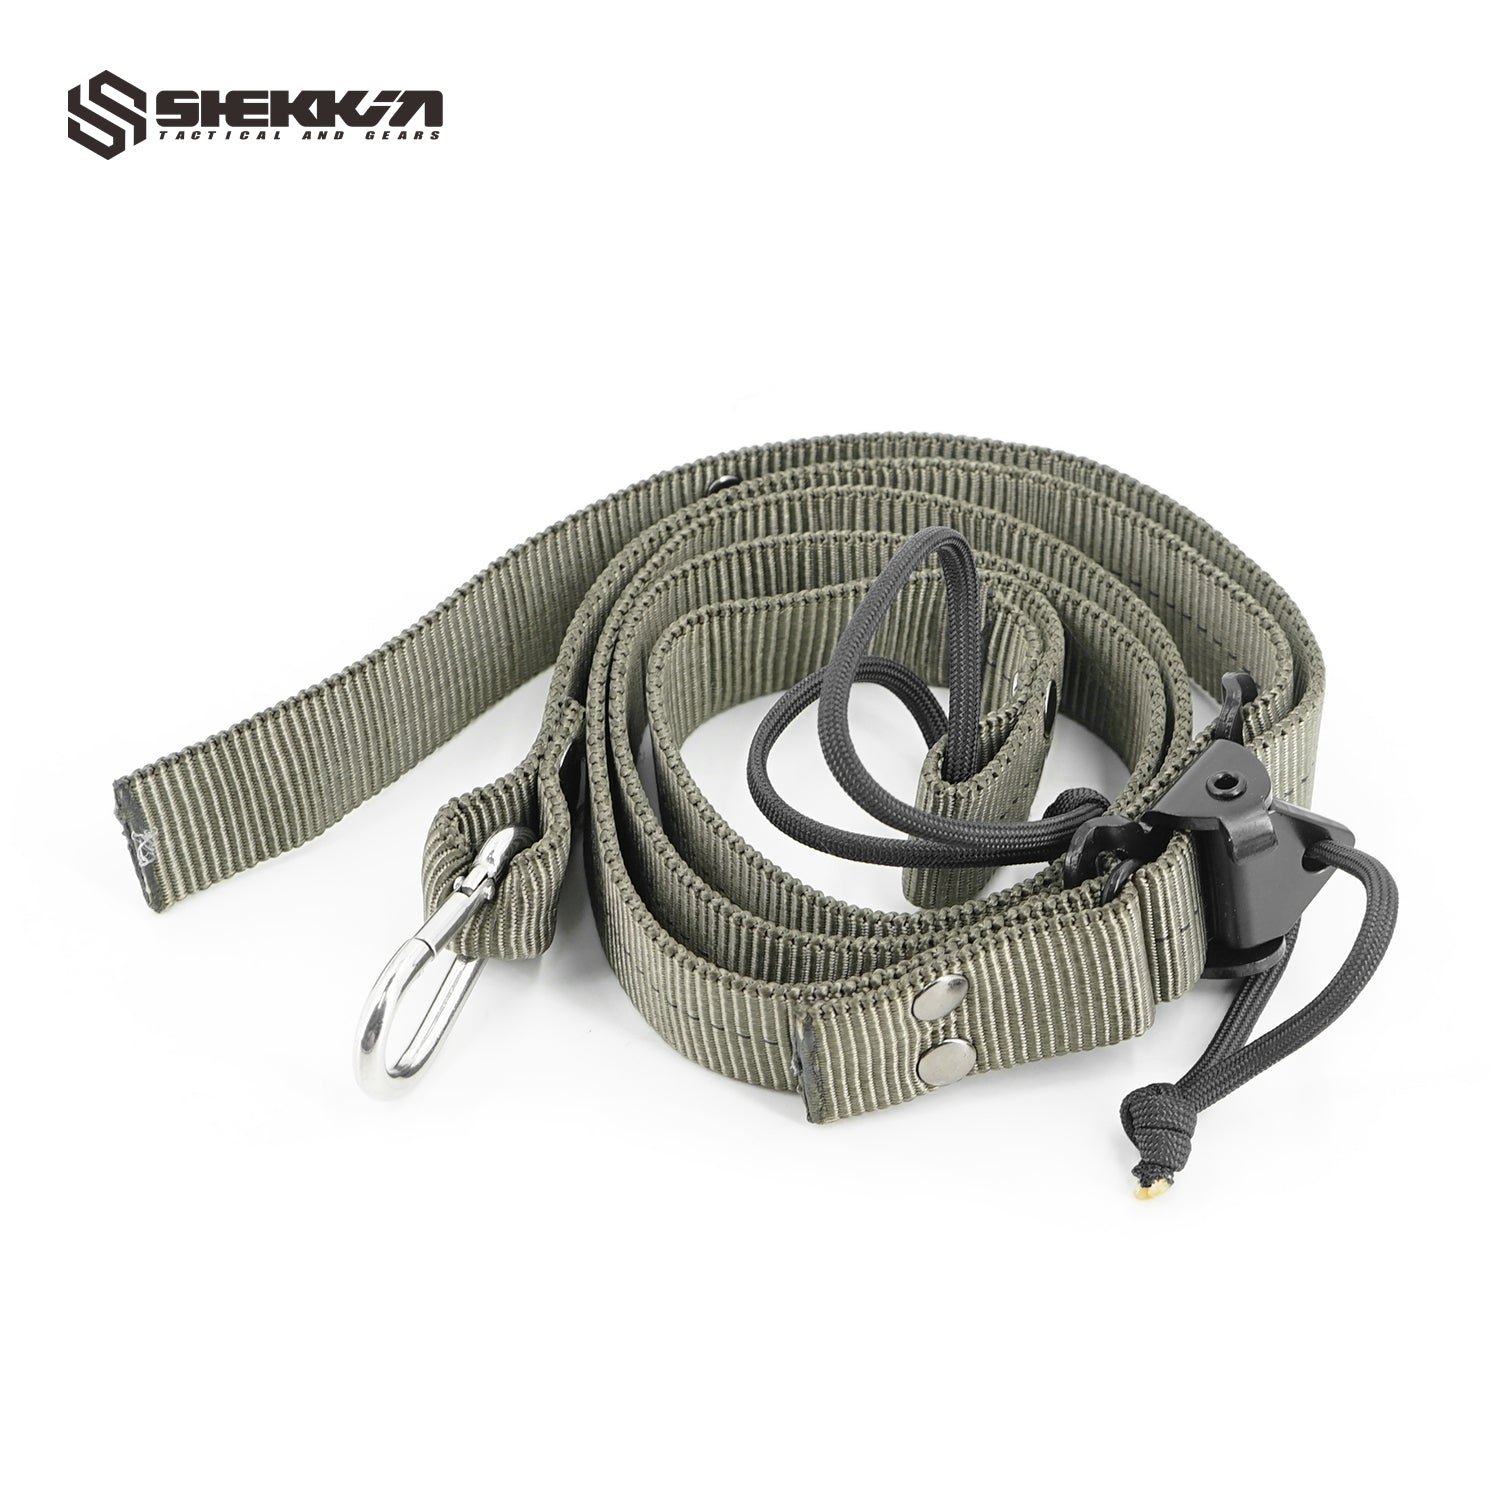 Old gen CAG two point tactical sling